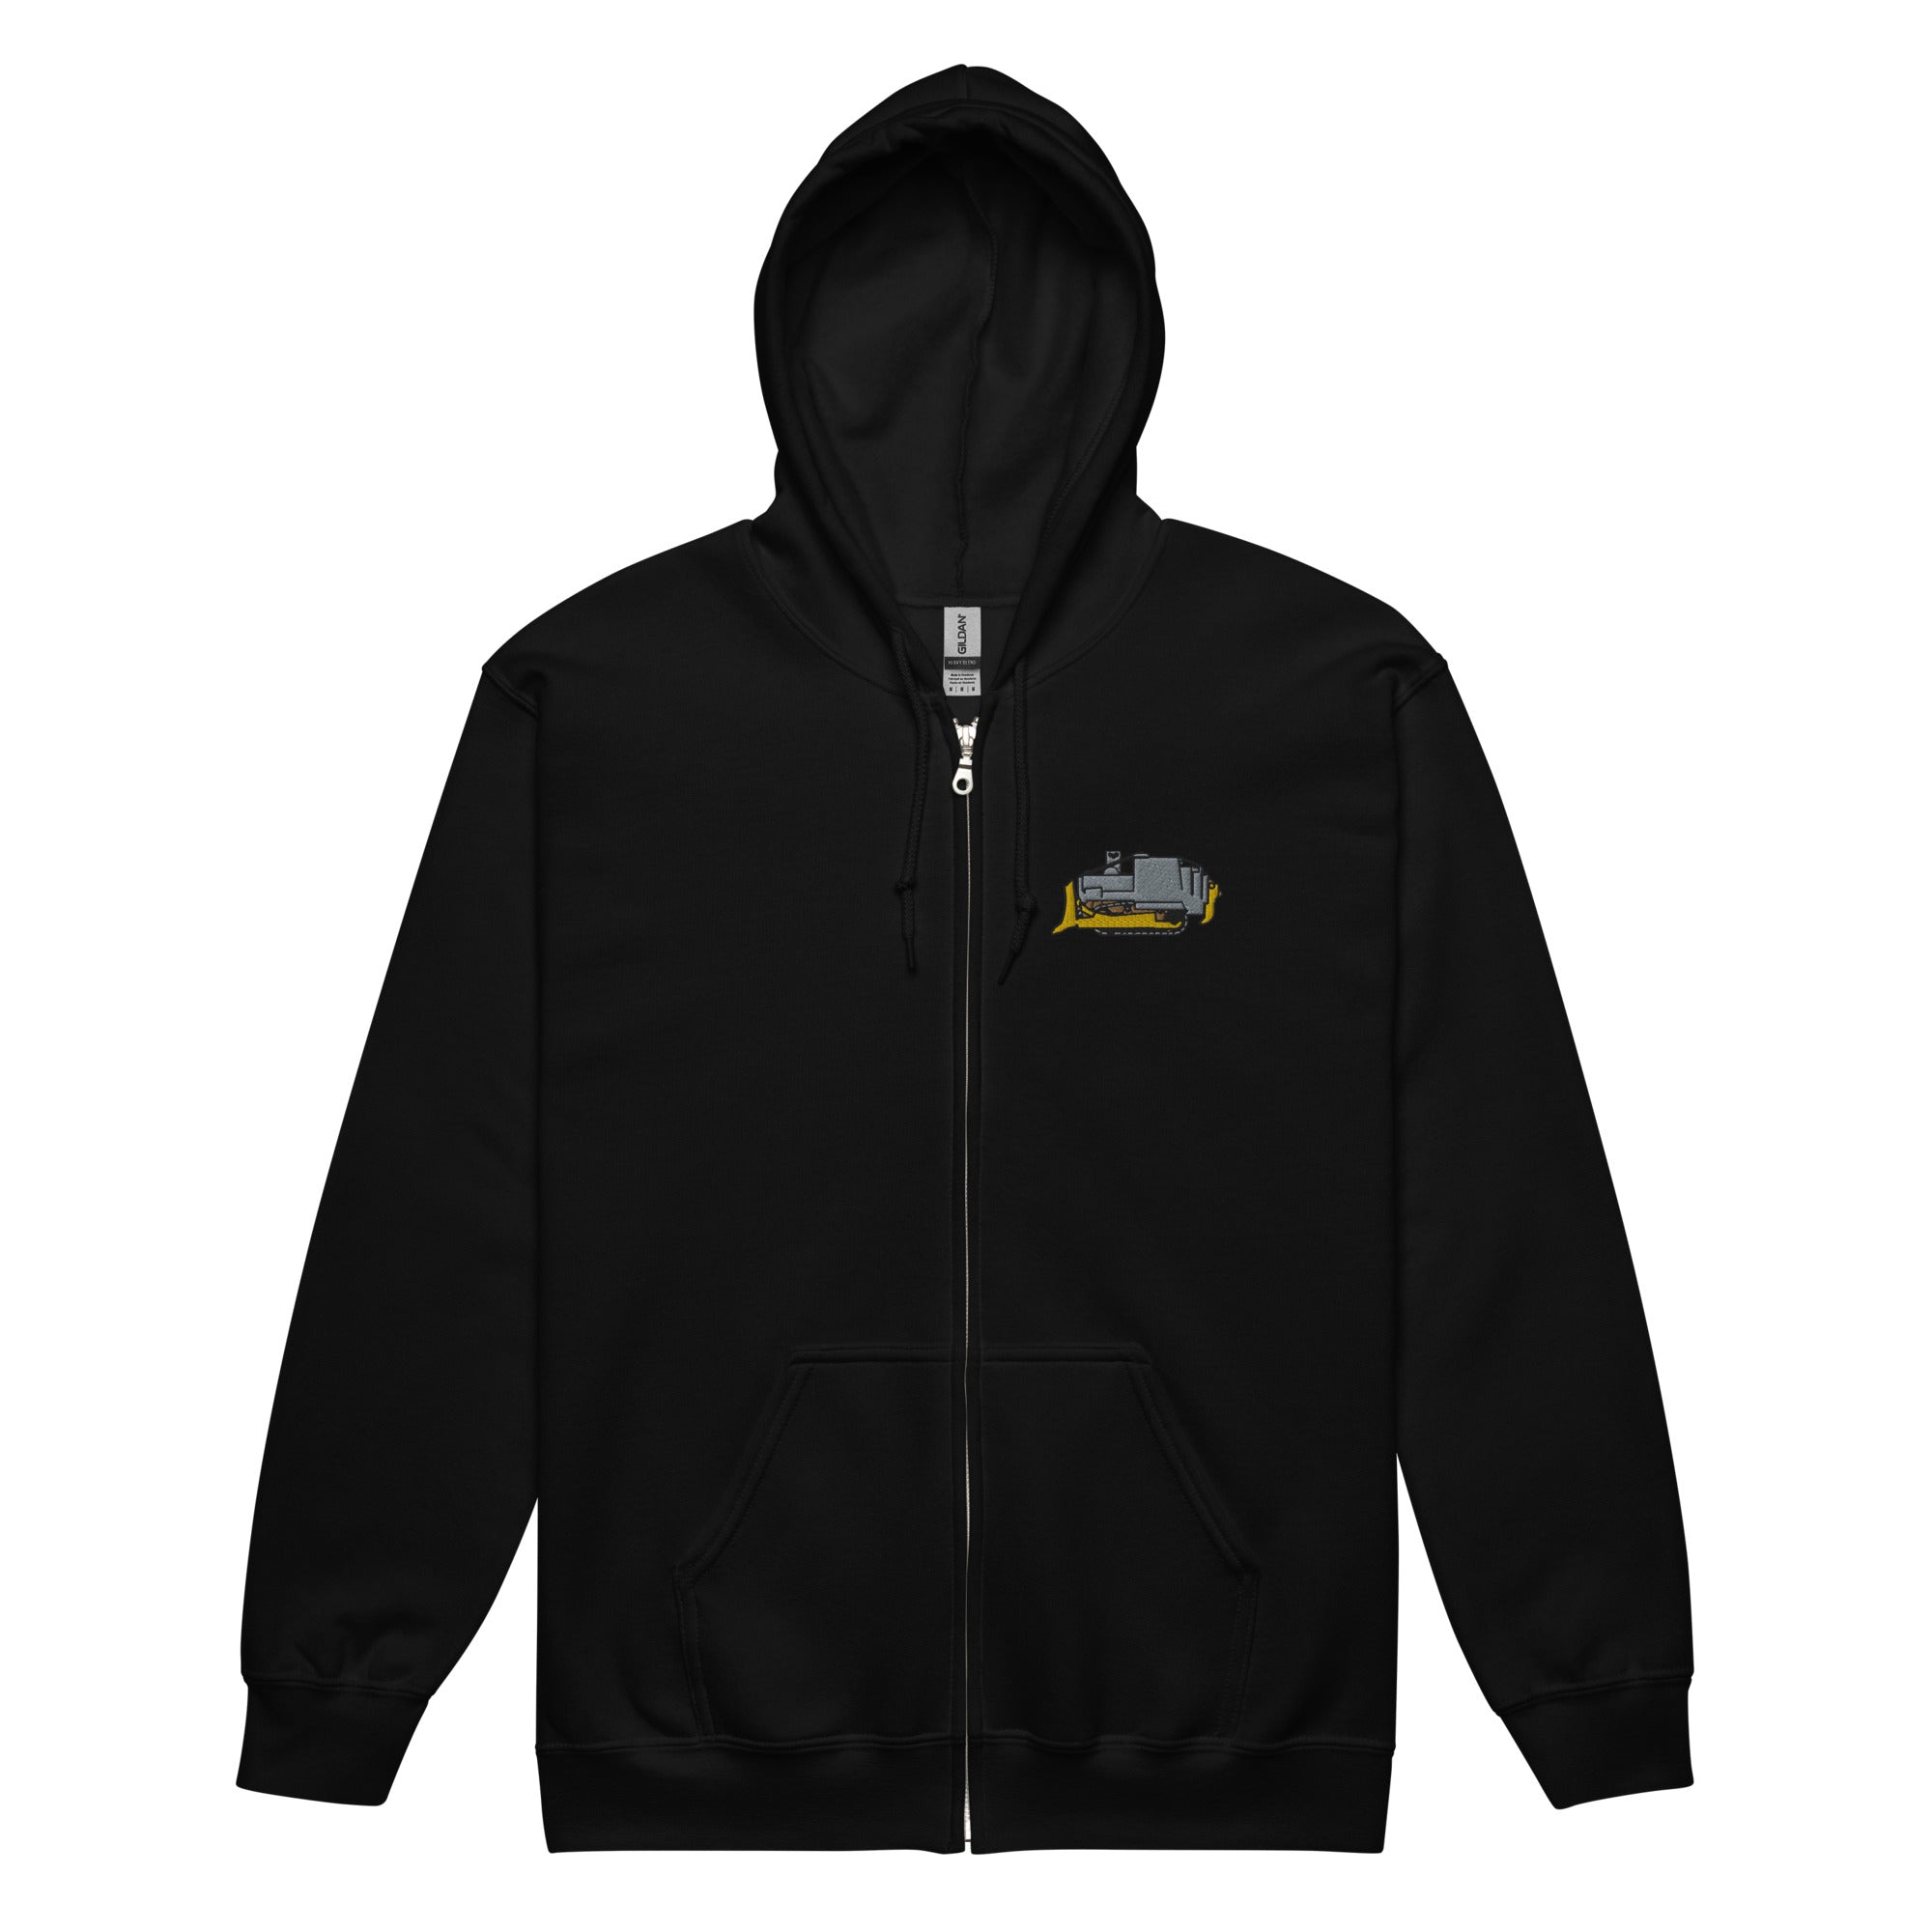 The Killdozer Embroidered Heavy Blend Zip Hoodie